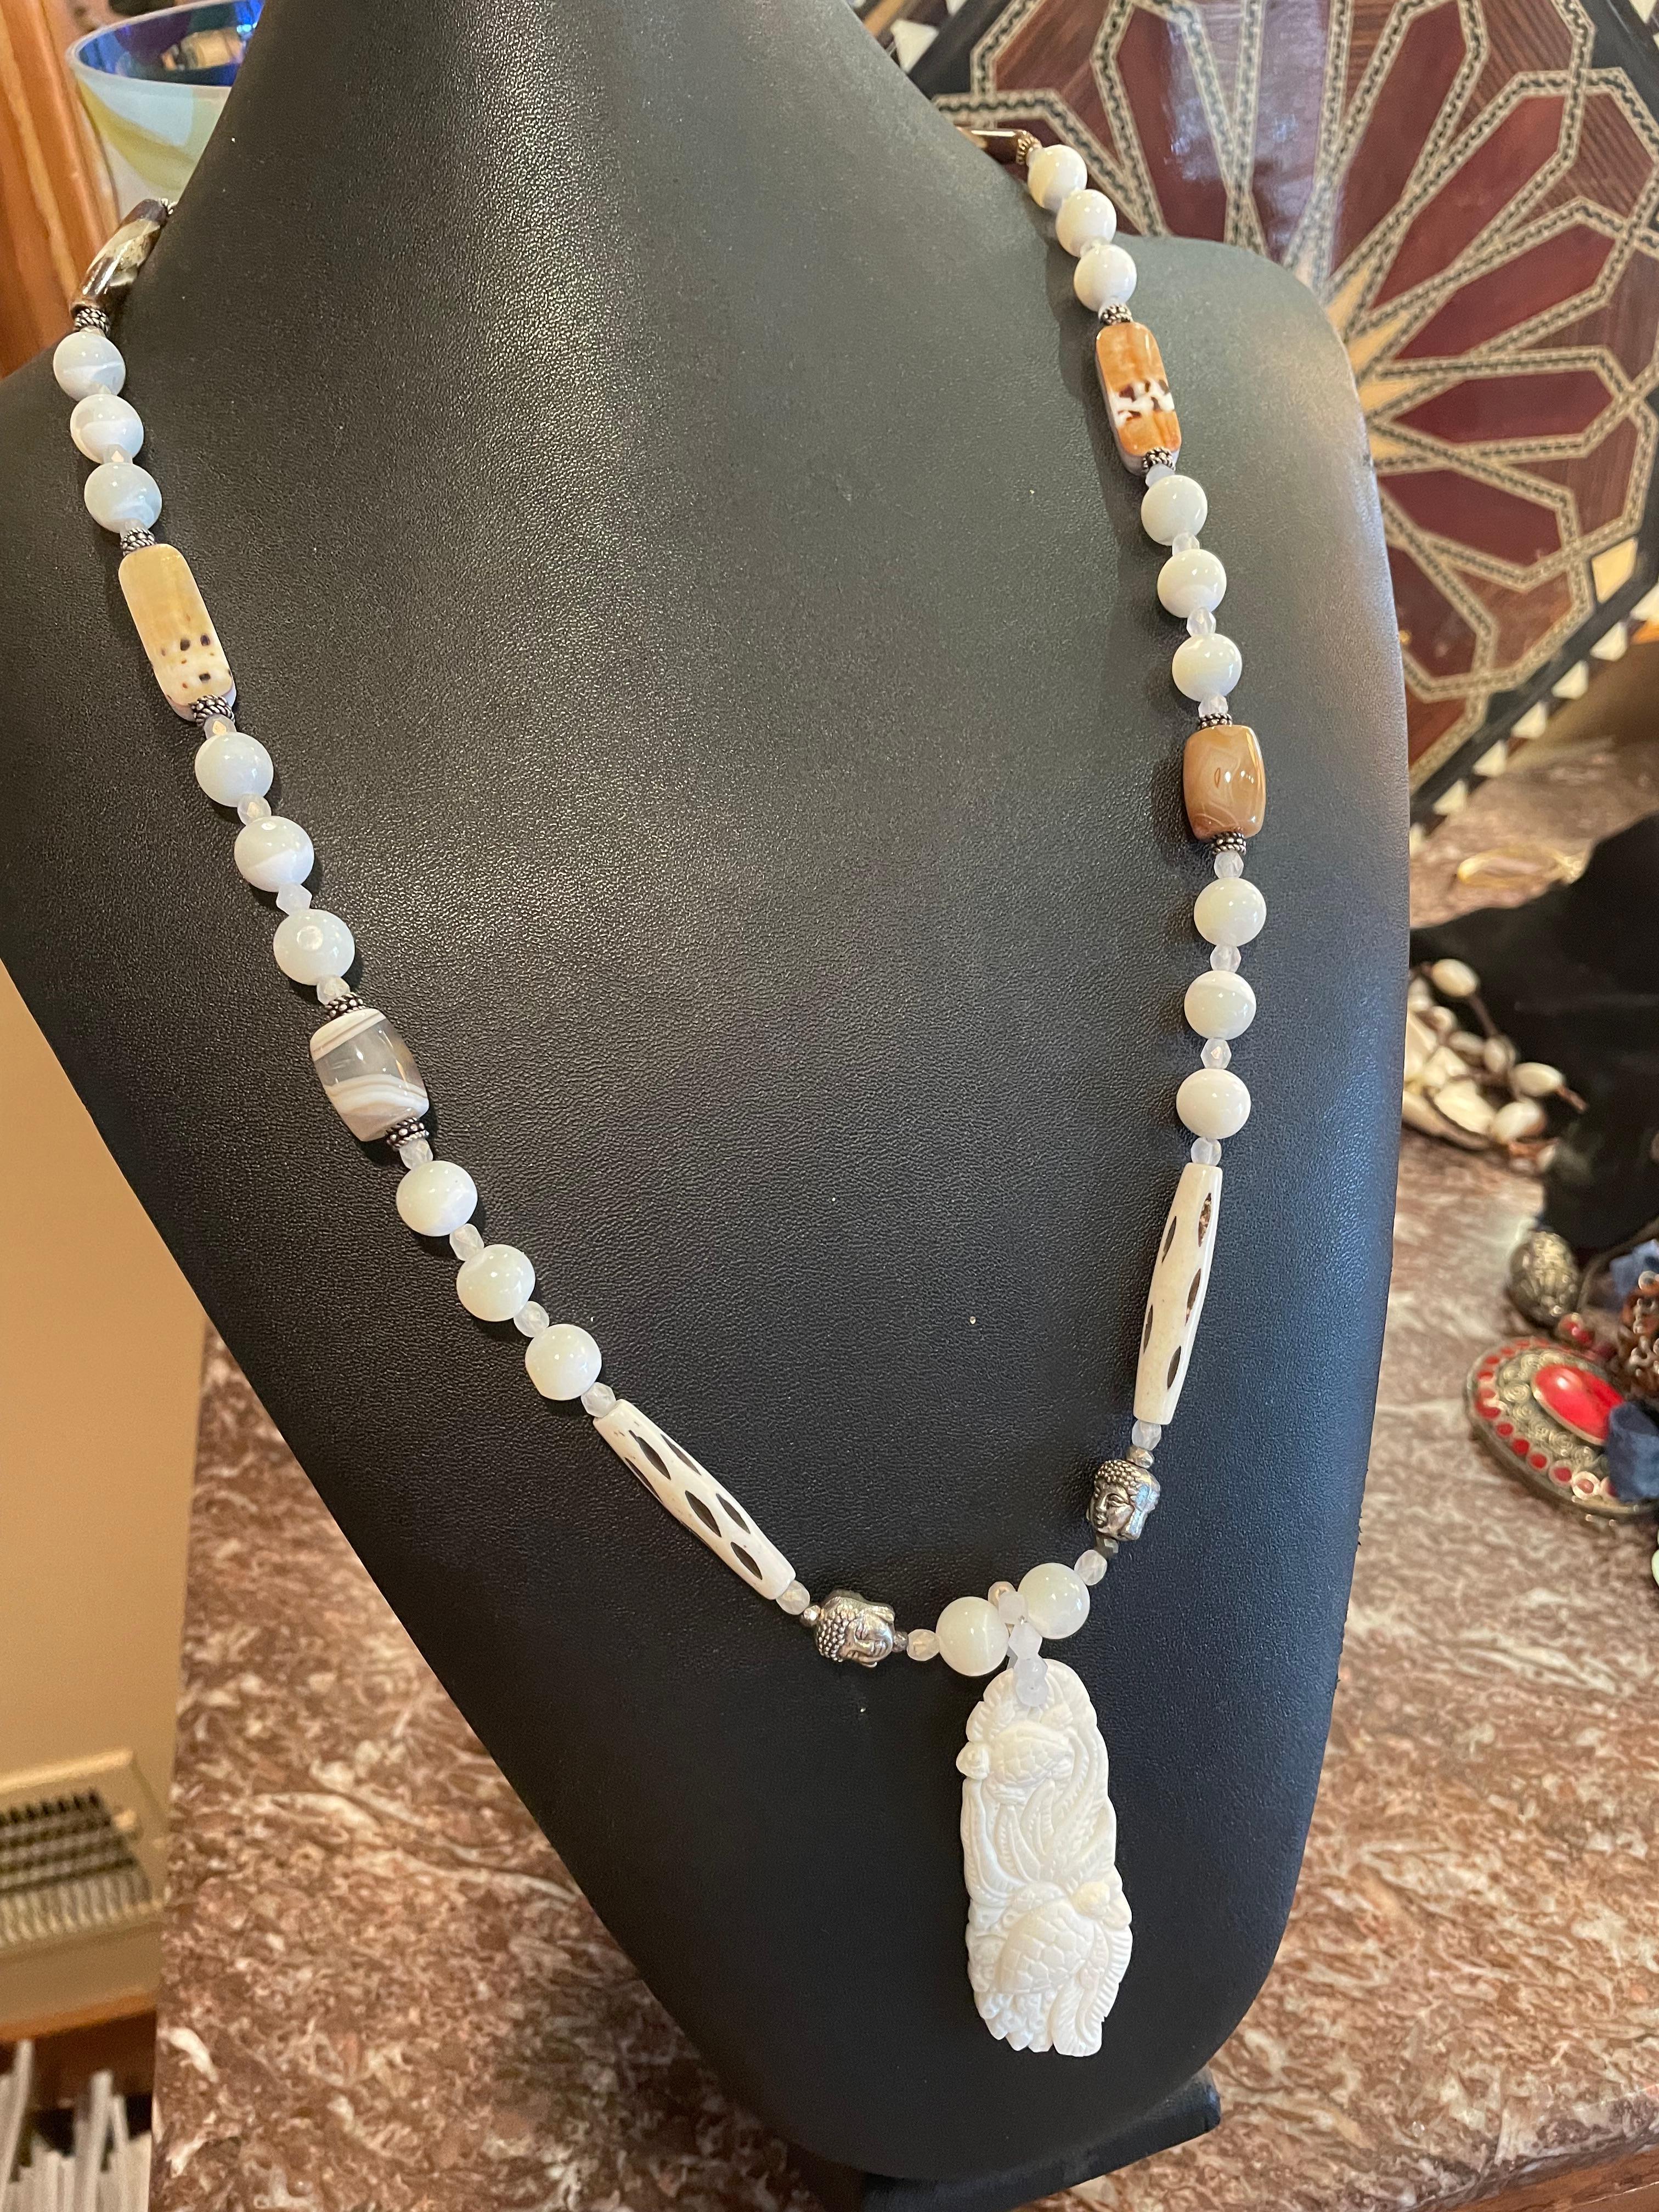 Lorraine’s Bijoux offers a handmade, one of a kind hand carved bone turtle pendant necklace.
A string of lovely round mother of pearl beads, brown agates, sterling silver Buddha head beads,and carved bone tubular beads comprise this lovely casual